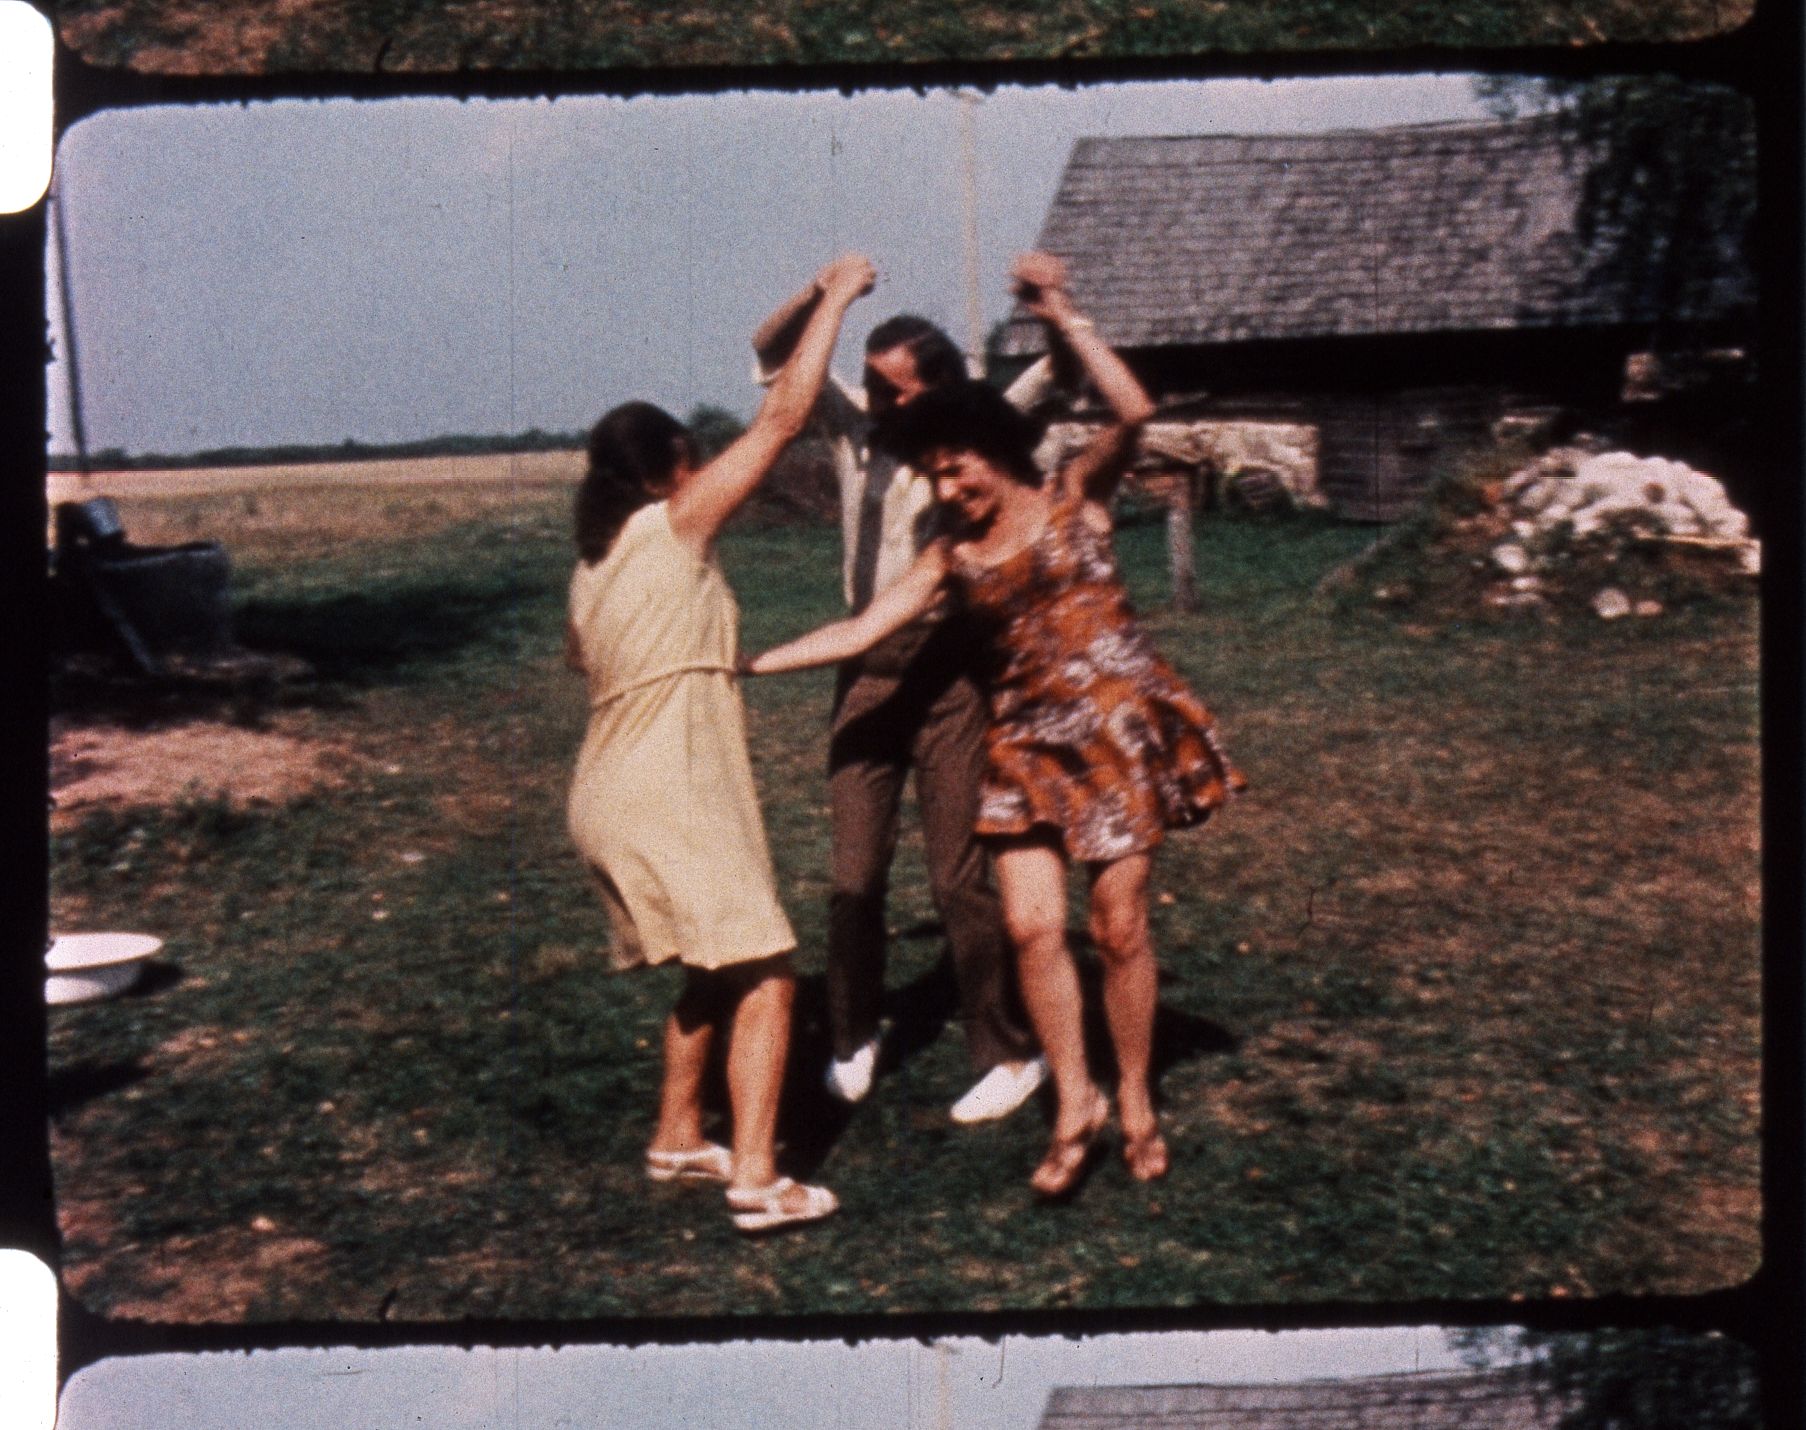 Still from film "Going Home" (1972) by Adolfas Mekas